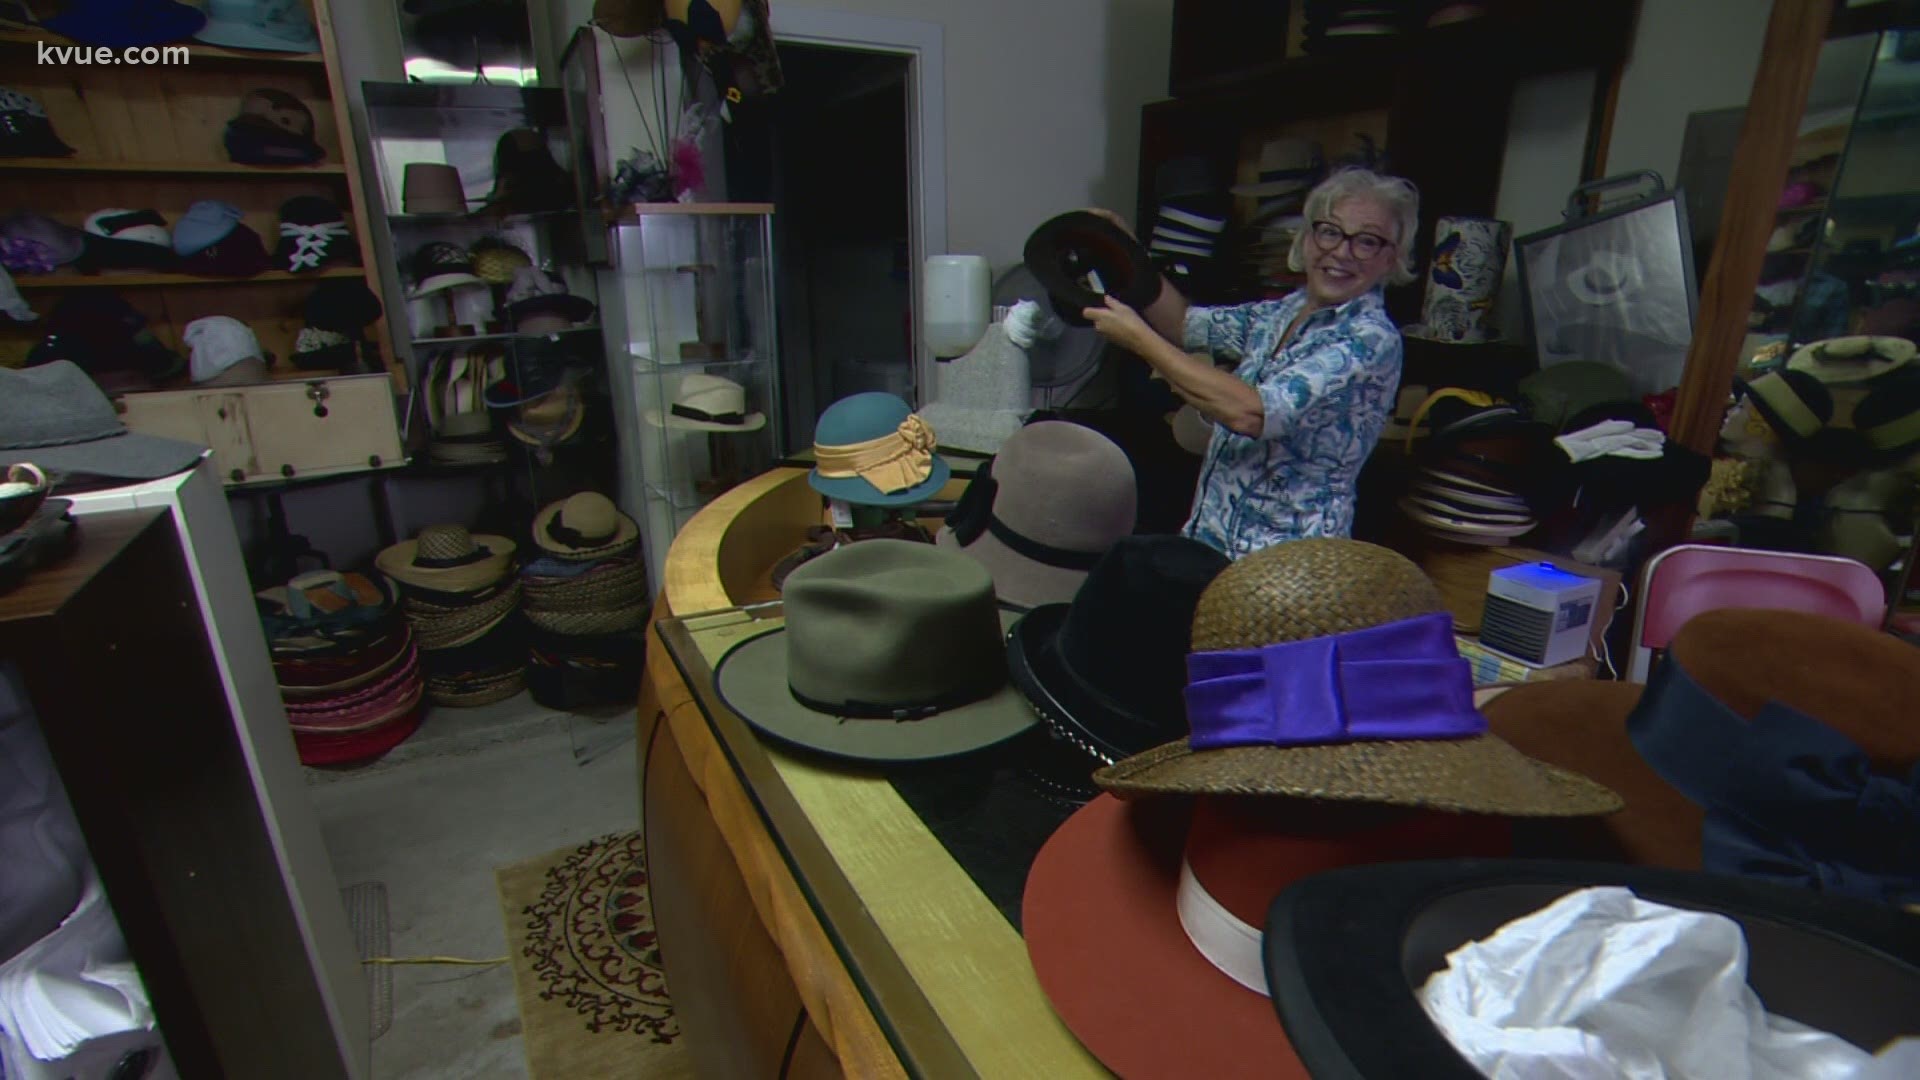 For 46 years, the owner of The HatBox has been fitting people from all walks of life into hats. But COVID-19 has forced her to change how she does business.